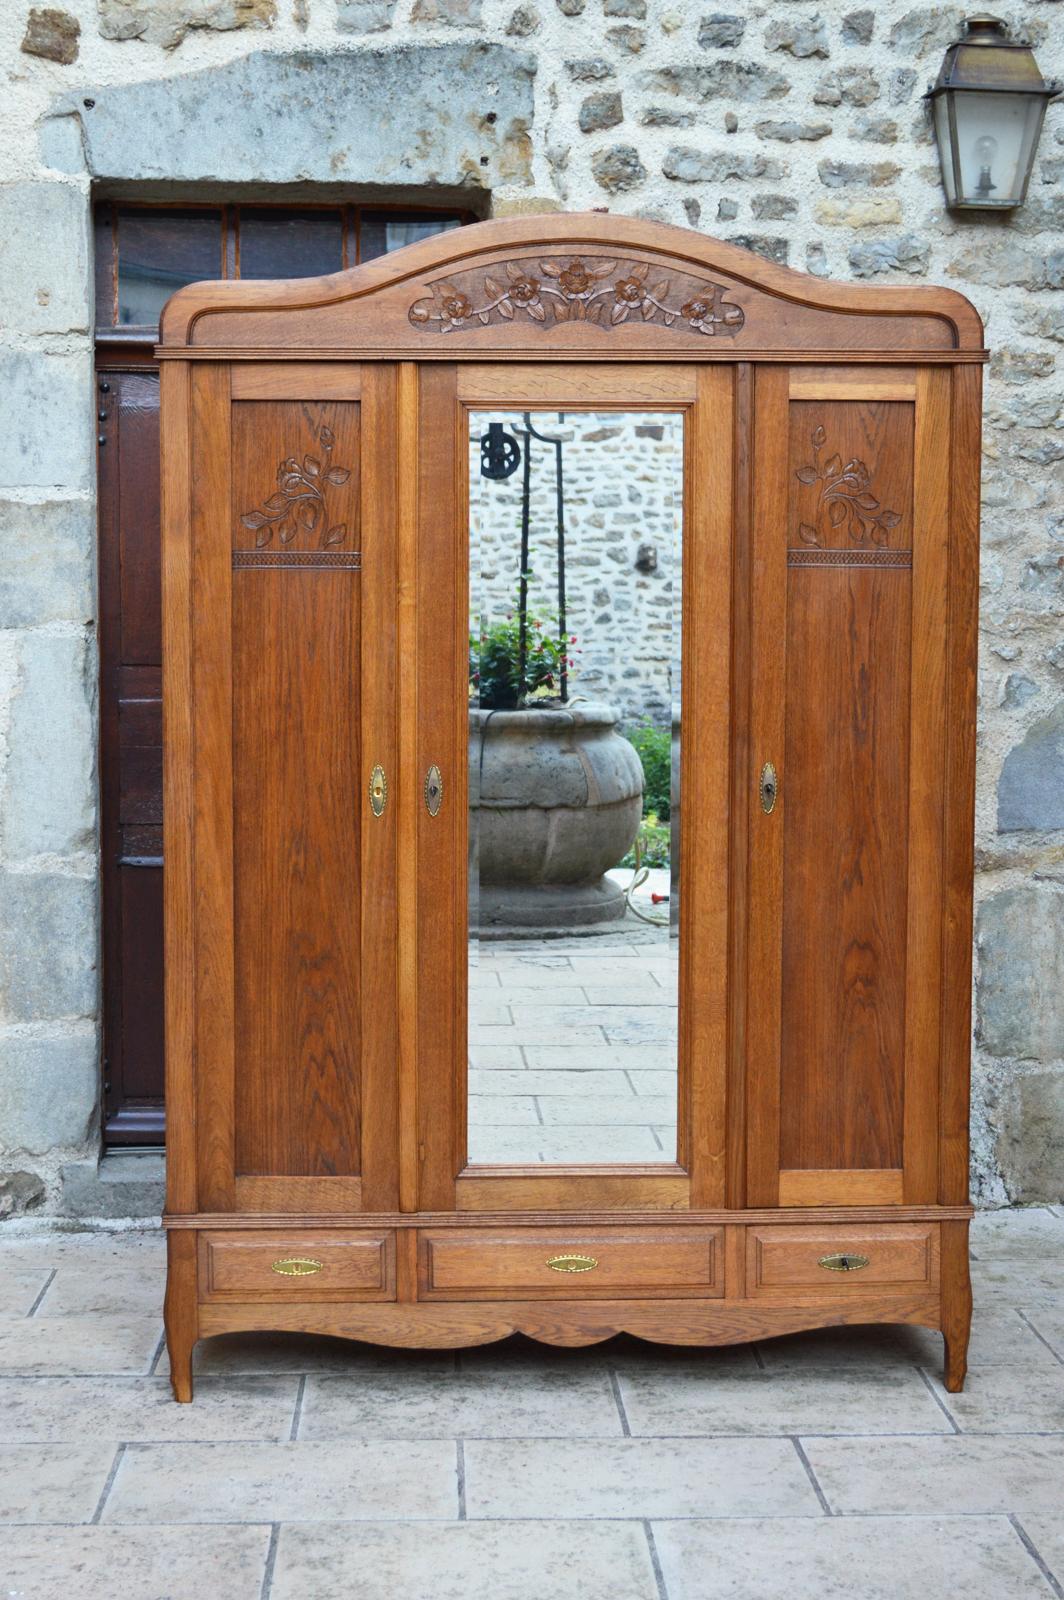 Beautiful bedroom wardrobe in solid oak carved with flowers.

This cabinet consists of a beautifully carved pediment, 3 doors, one of which has a beveled mirror, and 3 drawers.
The doors open onto a large wardrobe section on the left and a